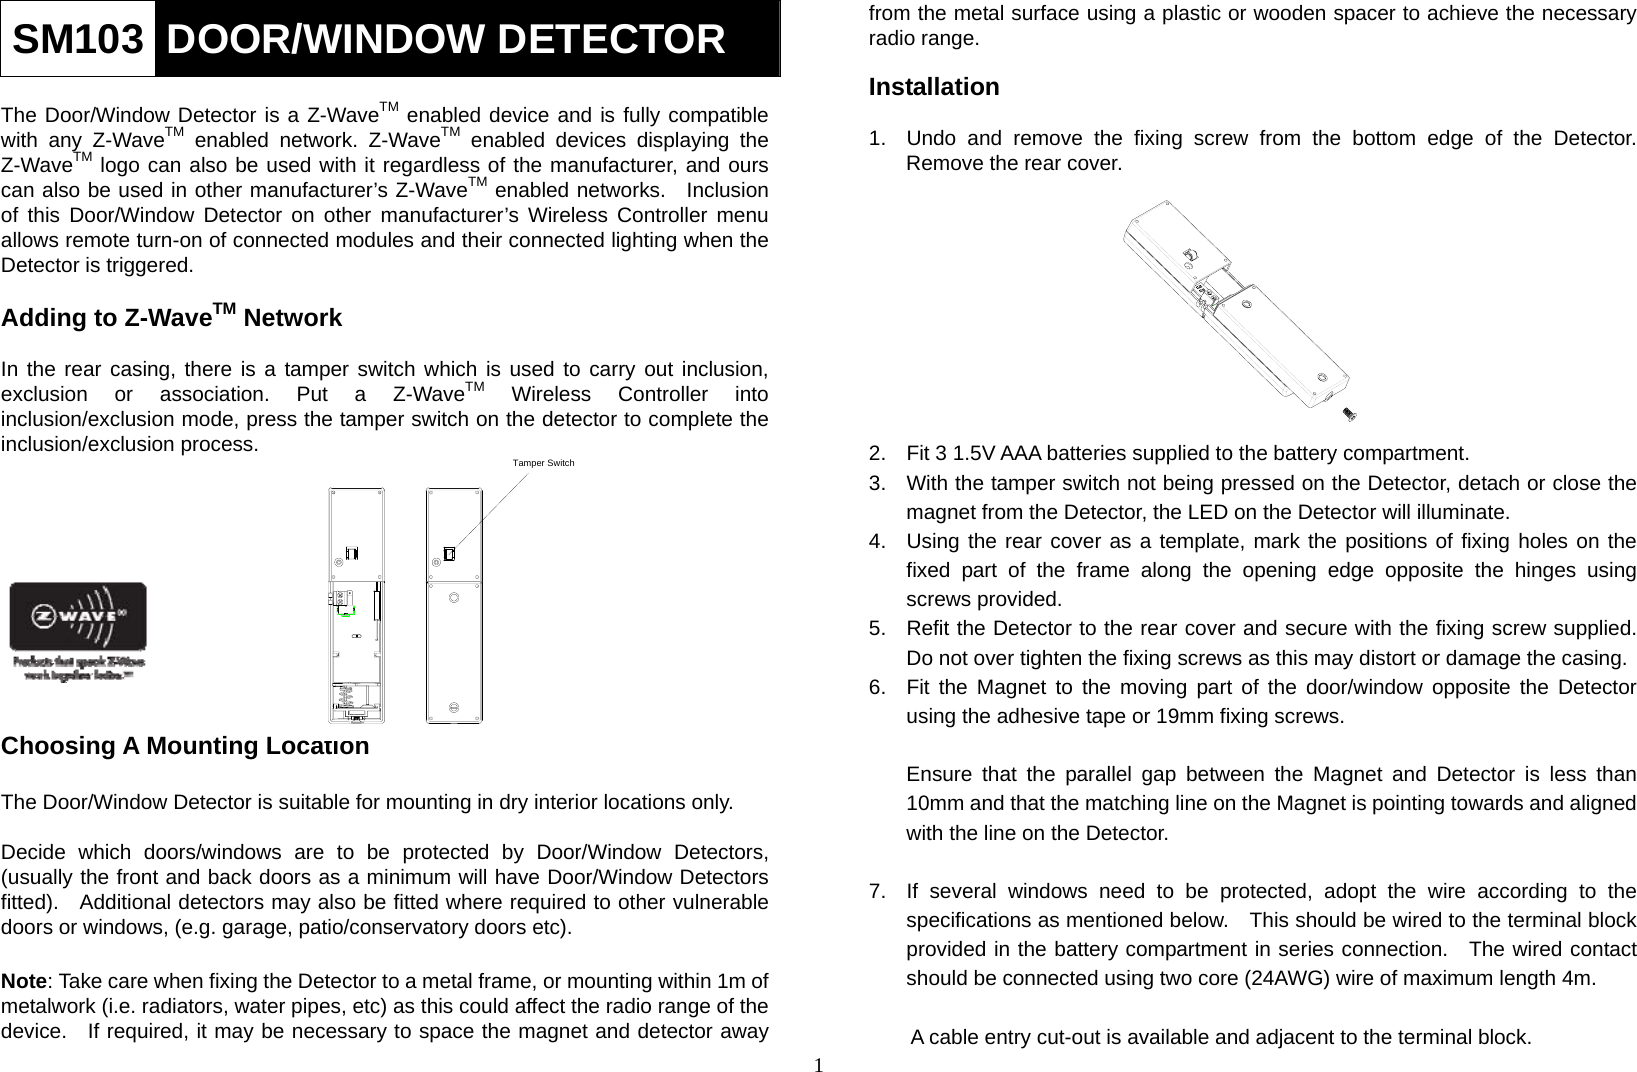 1 SM103  DOOR/WINDOW DETECTOR  The Door/Window Detector is a Z-WaveTM enabled device and is fully compatible with any Z-WaveTM enabled network. Z-WaveTM enabled devices displaying the Z-WaveTM logo can also be used with it regardless of the manufacturer, and ours can also be used in other manufacturer’s Z-WaveTM enabled networks.  Inclusion of this Door/Window Detector on other manufacturer’s Wireless Controller menu allows remote turn-on of connected modules and their connected lighting when the Detector is triggered.      Adding to Z-WaveTM Network  In the rear casing, there is a tamper switch which is used to carry out inclusion, exclusion or association. Put a Z-WaveTM Wireless Controller into inclusion/exclusion mode, press the tamper switch on the detector to complete the inclusion/exclusion process.            Choosing A Mounting Location  The Door/Window Detector is suitable for mounting in dry interior locations only.  Decide which doors/windows are to be protected by Door/Window Detectors, (usually the front and back doors as a minimum will have Door/Window Detectors fitted).    Additional detectors may also be fitted where required to other vulnerable doors or windows, (e.g. garage, patio/conservatory doors etc).  Note: Take care when fixing the Detector to a metal frame, or mounting within 1m of metalwork (i.e. radiators, water pipes, etc) as this could affect the radio range of the device.   If required, it may be necessary to space the magnet and detector away from the metal surface using a plastic or wooden spacer to achieve the necessary radio range.  Installation  1.  Undo and remove the fixing screw from the bottom edge of the Detector. Remove the rear cover.          2.  Fit 3 1.5V AAA batteries supplied to the battery compartment. 3.  With the tamper switch not being pressed on the Detector, detach or close the magnet from the Detector, the LED on the Detector will illuminate. 4.  Using the rear cover as a template, mark the positions of fixing holes on the fixed part of the frame along the opening edge opposite the hinges using screws provided.   5.  Refit the Detector to the rear cover and secure with the fixing screw supplied. Do not over tighten the fixing screws as this may distort or damage the casing. 6.  Fit the Magnet to the moving part of the door/window opposite the Detector using the adhesive tape or 19mm fixing screws.  Ensure that the parallel gap between the Magnet and Detector is less than 10mm and that the matching line on the Magnet is pointing towards and aligned with the line on the Detector.  7.  If several windows need to be protected, adopt the wire according to the specifications as mentioned below.    This should be wired to the terminal block provided in the battery compartment in series connection.  The wired contact should be connected using two core (24AWG) wire of maximum length 4m.    A cable entry cut-out is available and adjacent to the terminal block. Tamper Switch